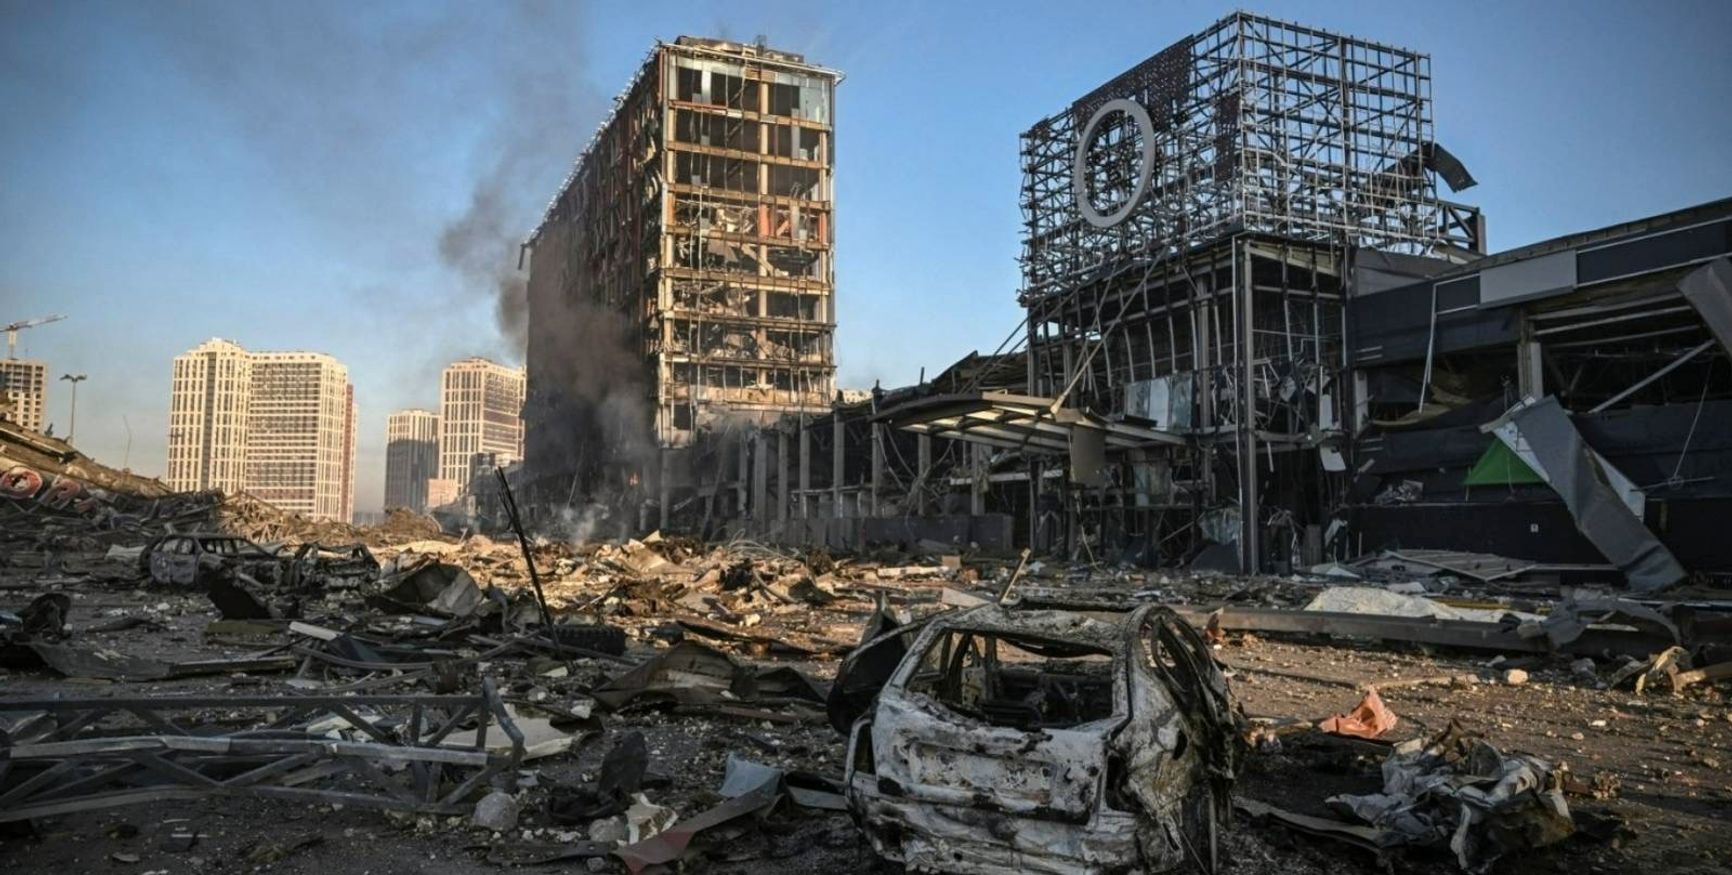 The aftermath of a Russian missile strike on a shopping mall in Kyiv. The attack is believed to have been carried out with a Kinzhal missile